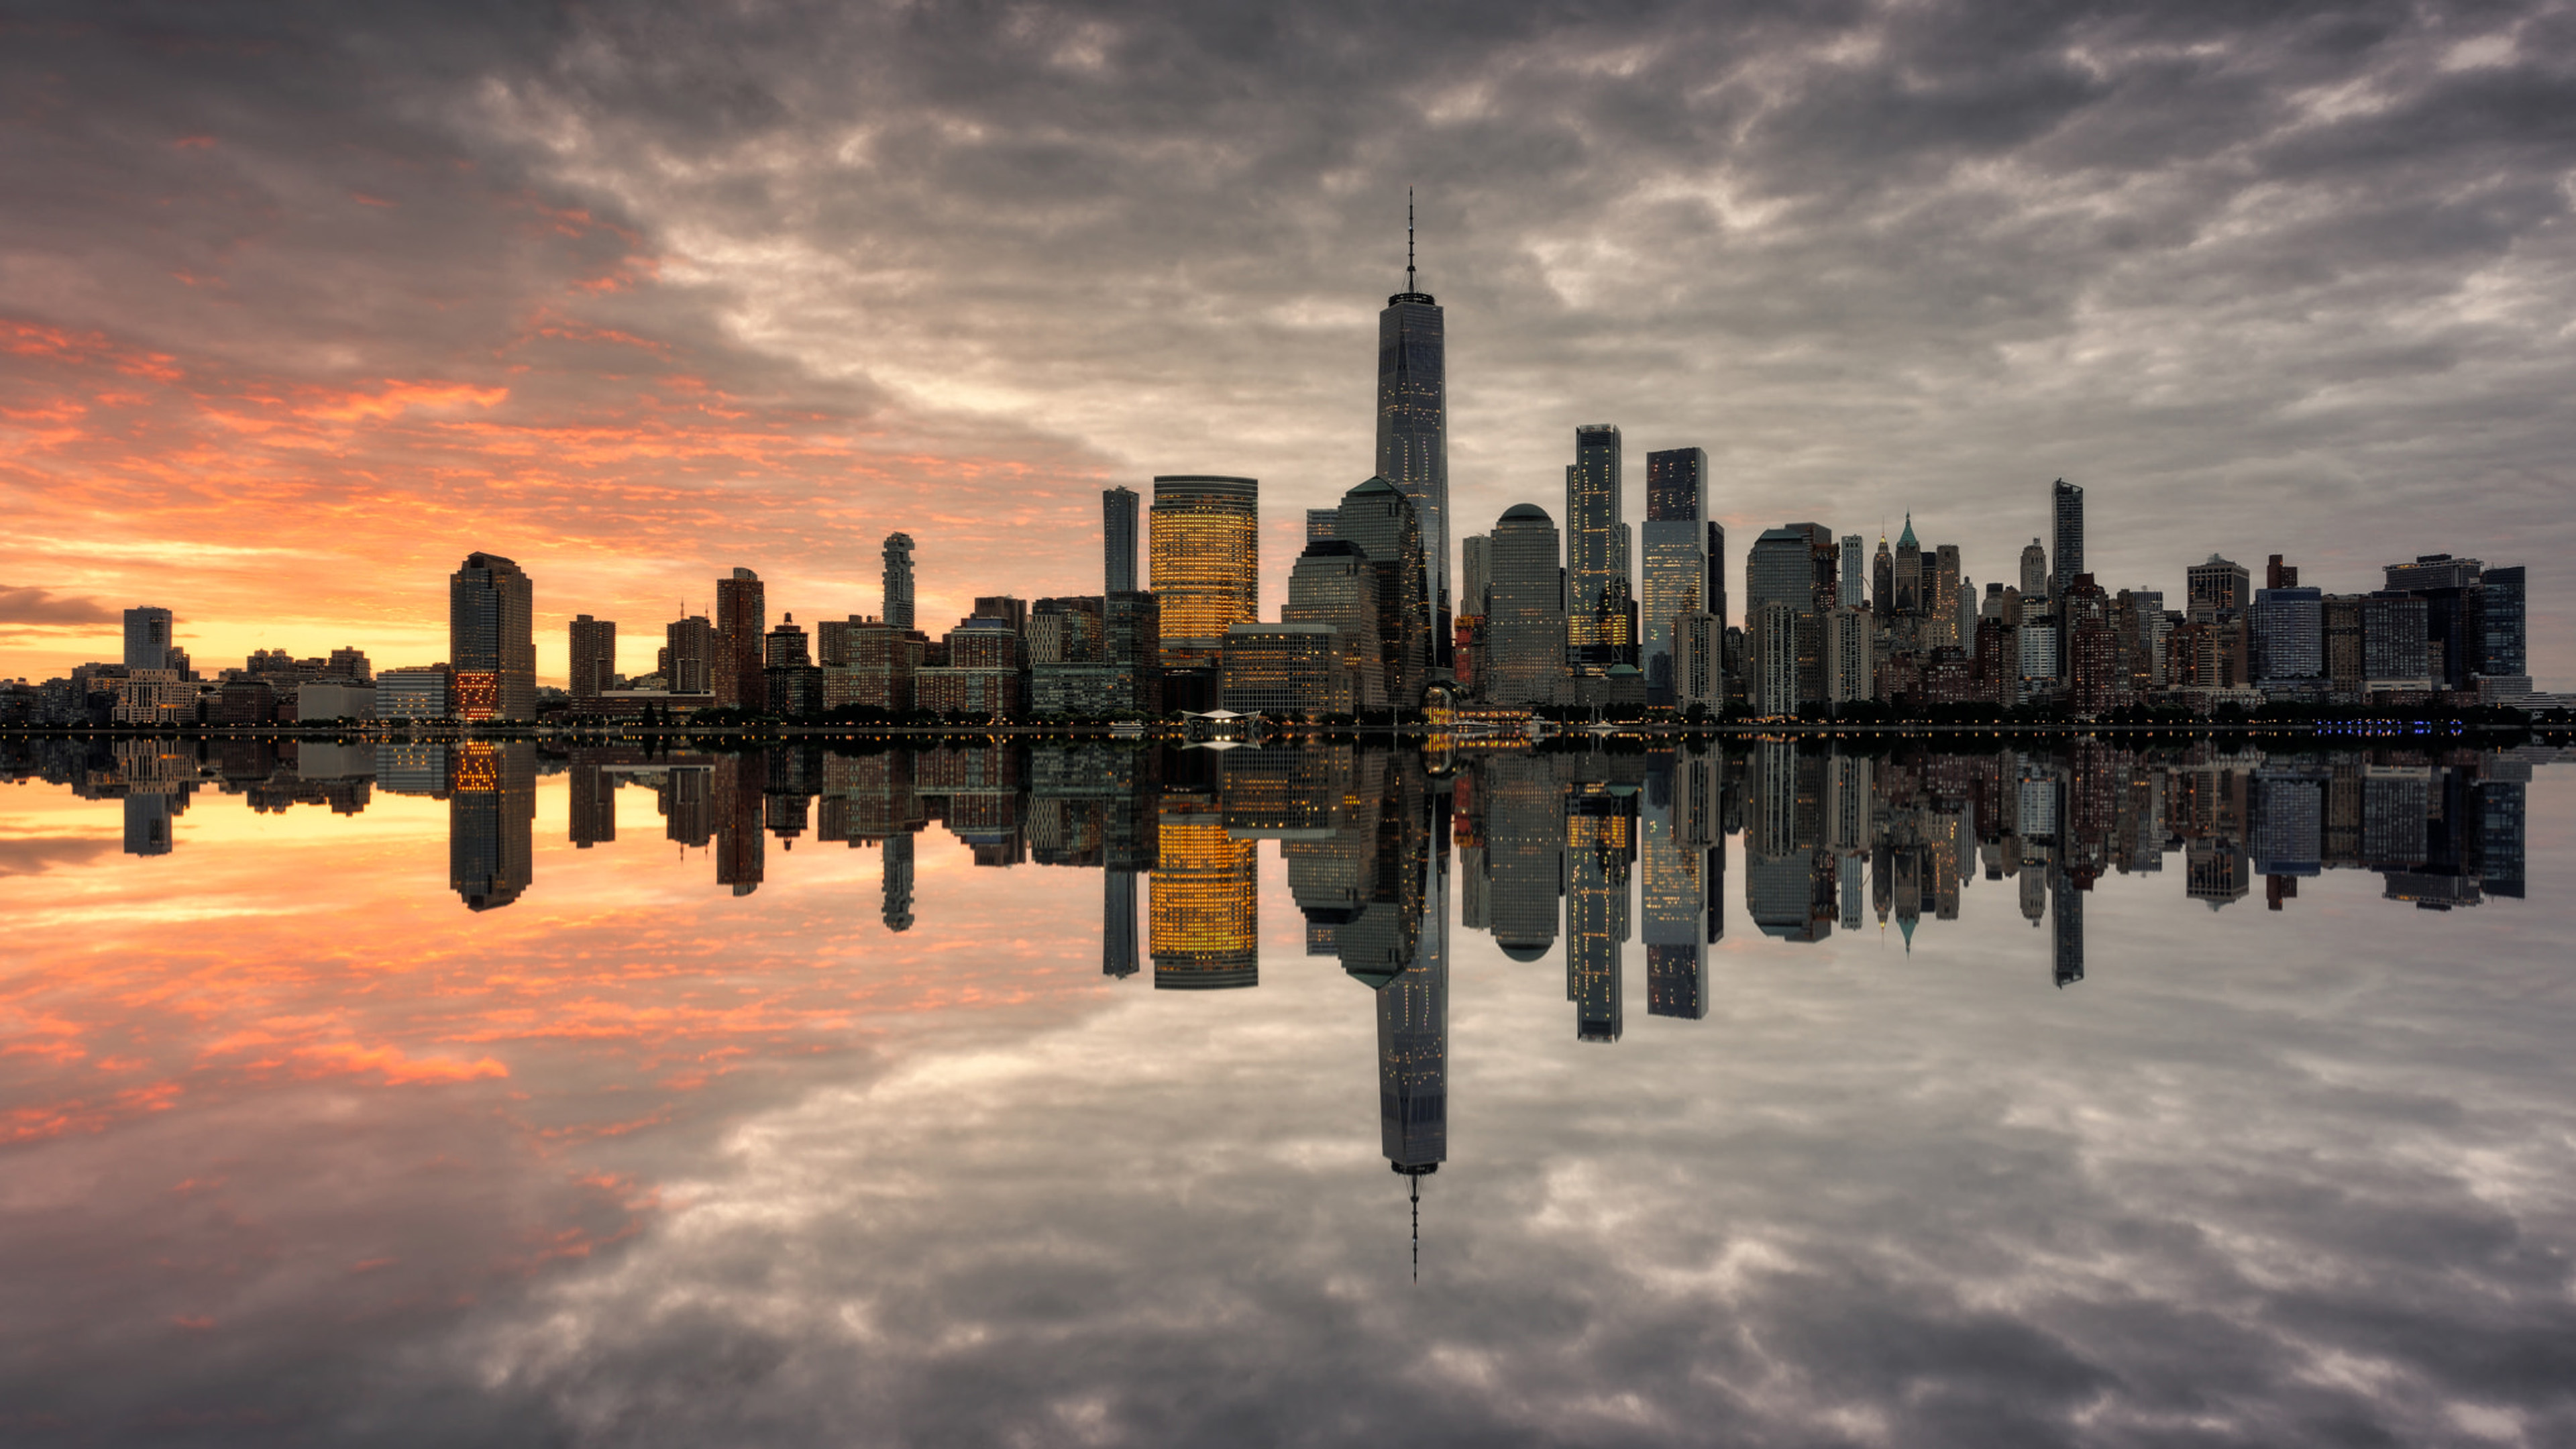 Manhattan Skyline The Most Populated New York City Sunnset Reflection In  The Water Miror Ultra Hd Wallpaper For Desktop Mobile Phones And Laptops  3840x2160 : 